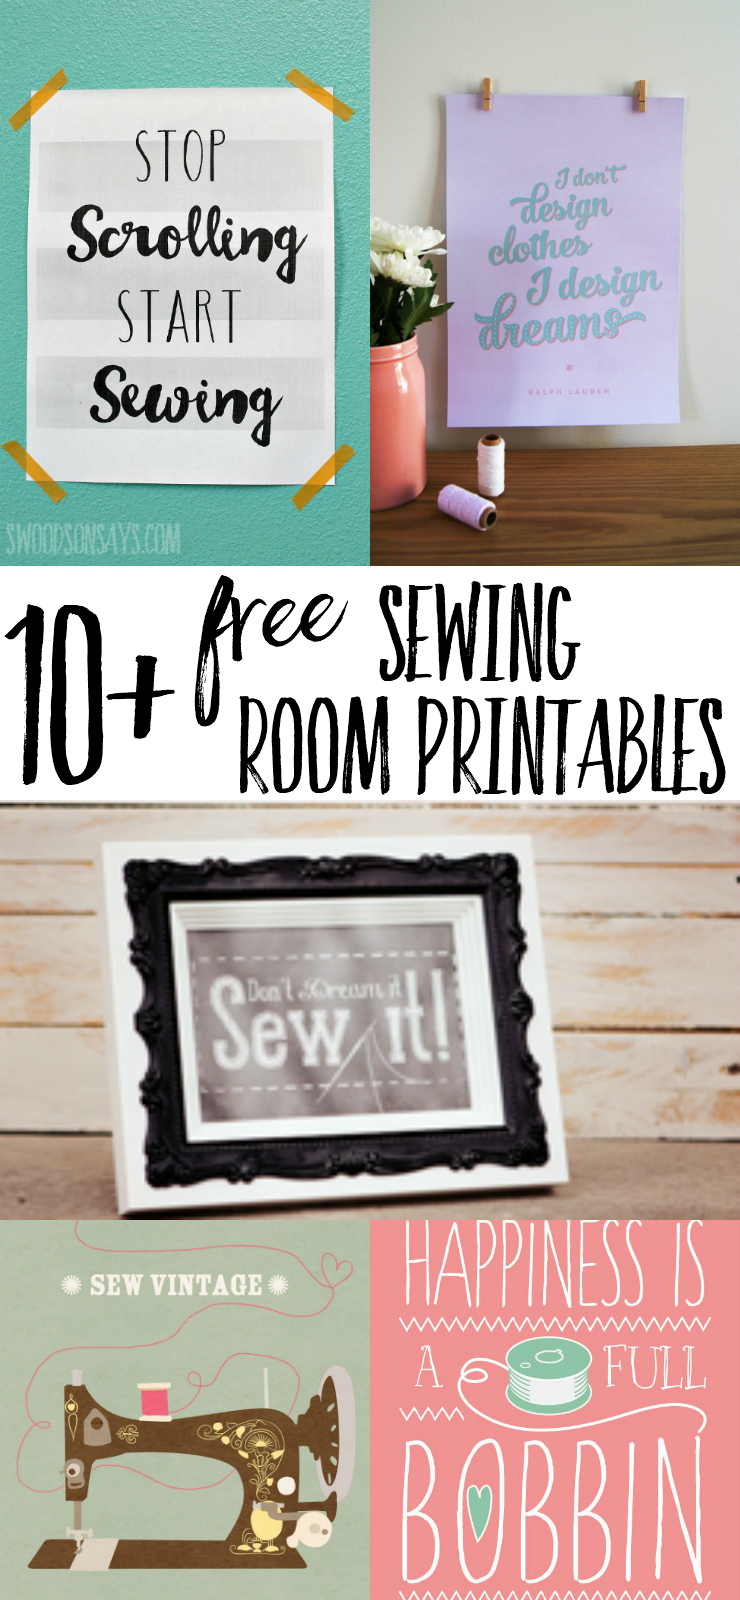 Looking for DIY sewing room decor? Check out this list of 10+ FREE sewing printables, perfect to frame and hang in your craft room. #craftroom #sewingroom #freeprintable #walldecor #sewing